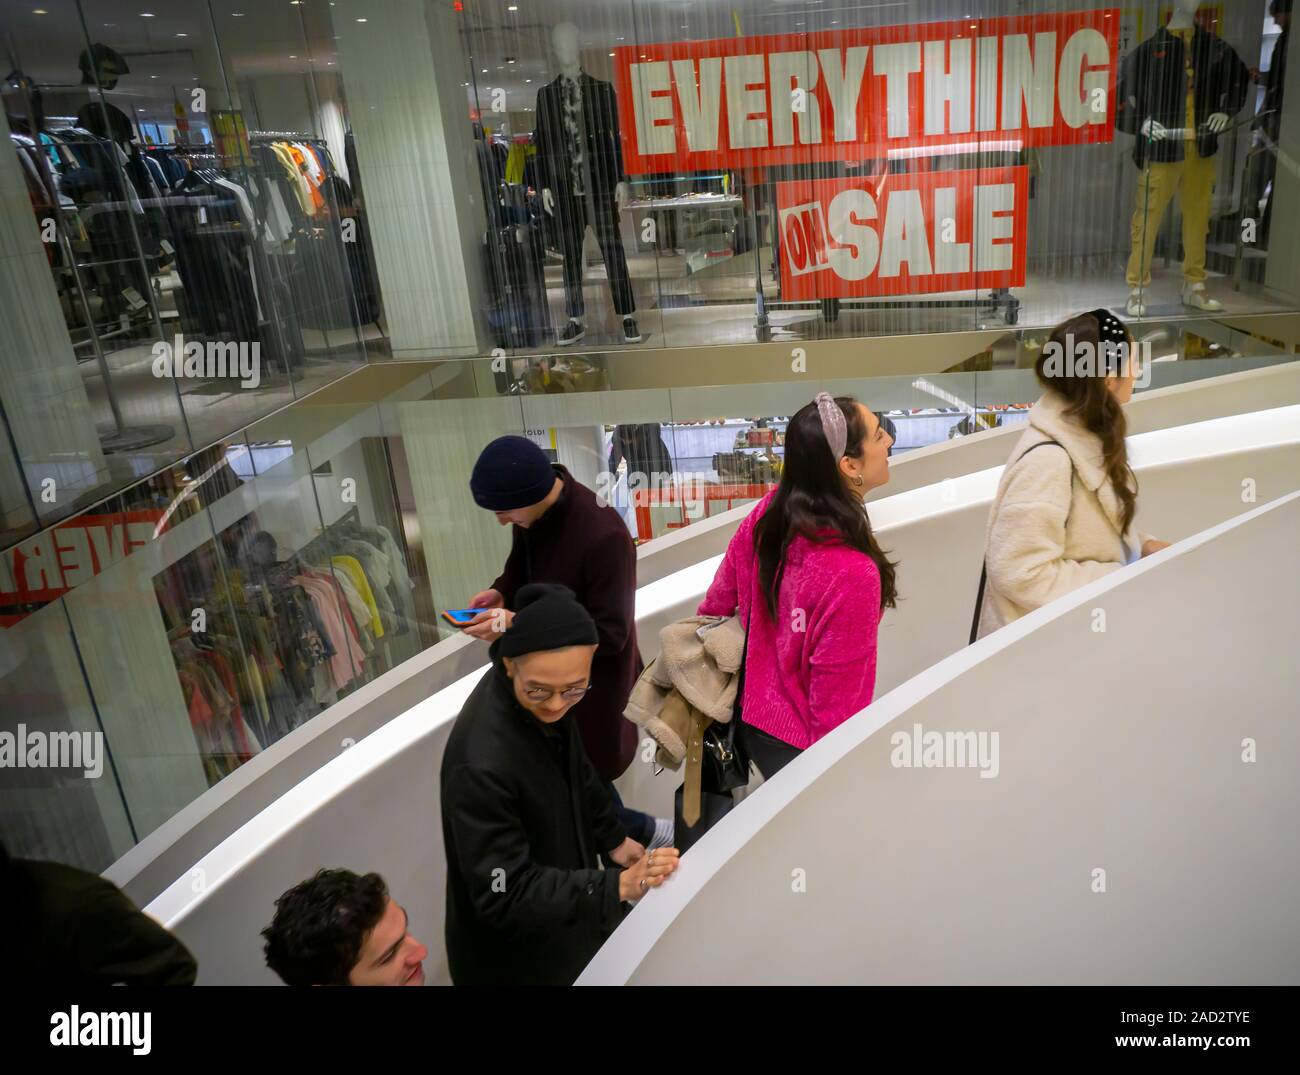 The Barneys store on Seventh Avenue in New York is festooned with signs informing loyal fans that the store is liquidating, seen on Saturday, November 23, 2019. The iconic fashion outposts were sold to B. Riley Financial, liquidation specialists, while the intellectual property went to Authentic Brands Group. (© Richard B. Levine) Stock Photo